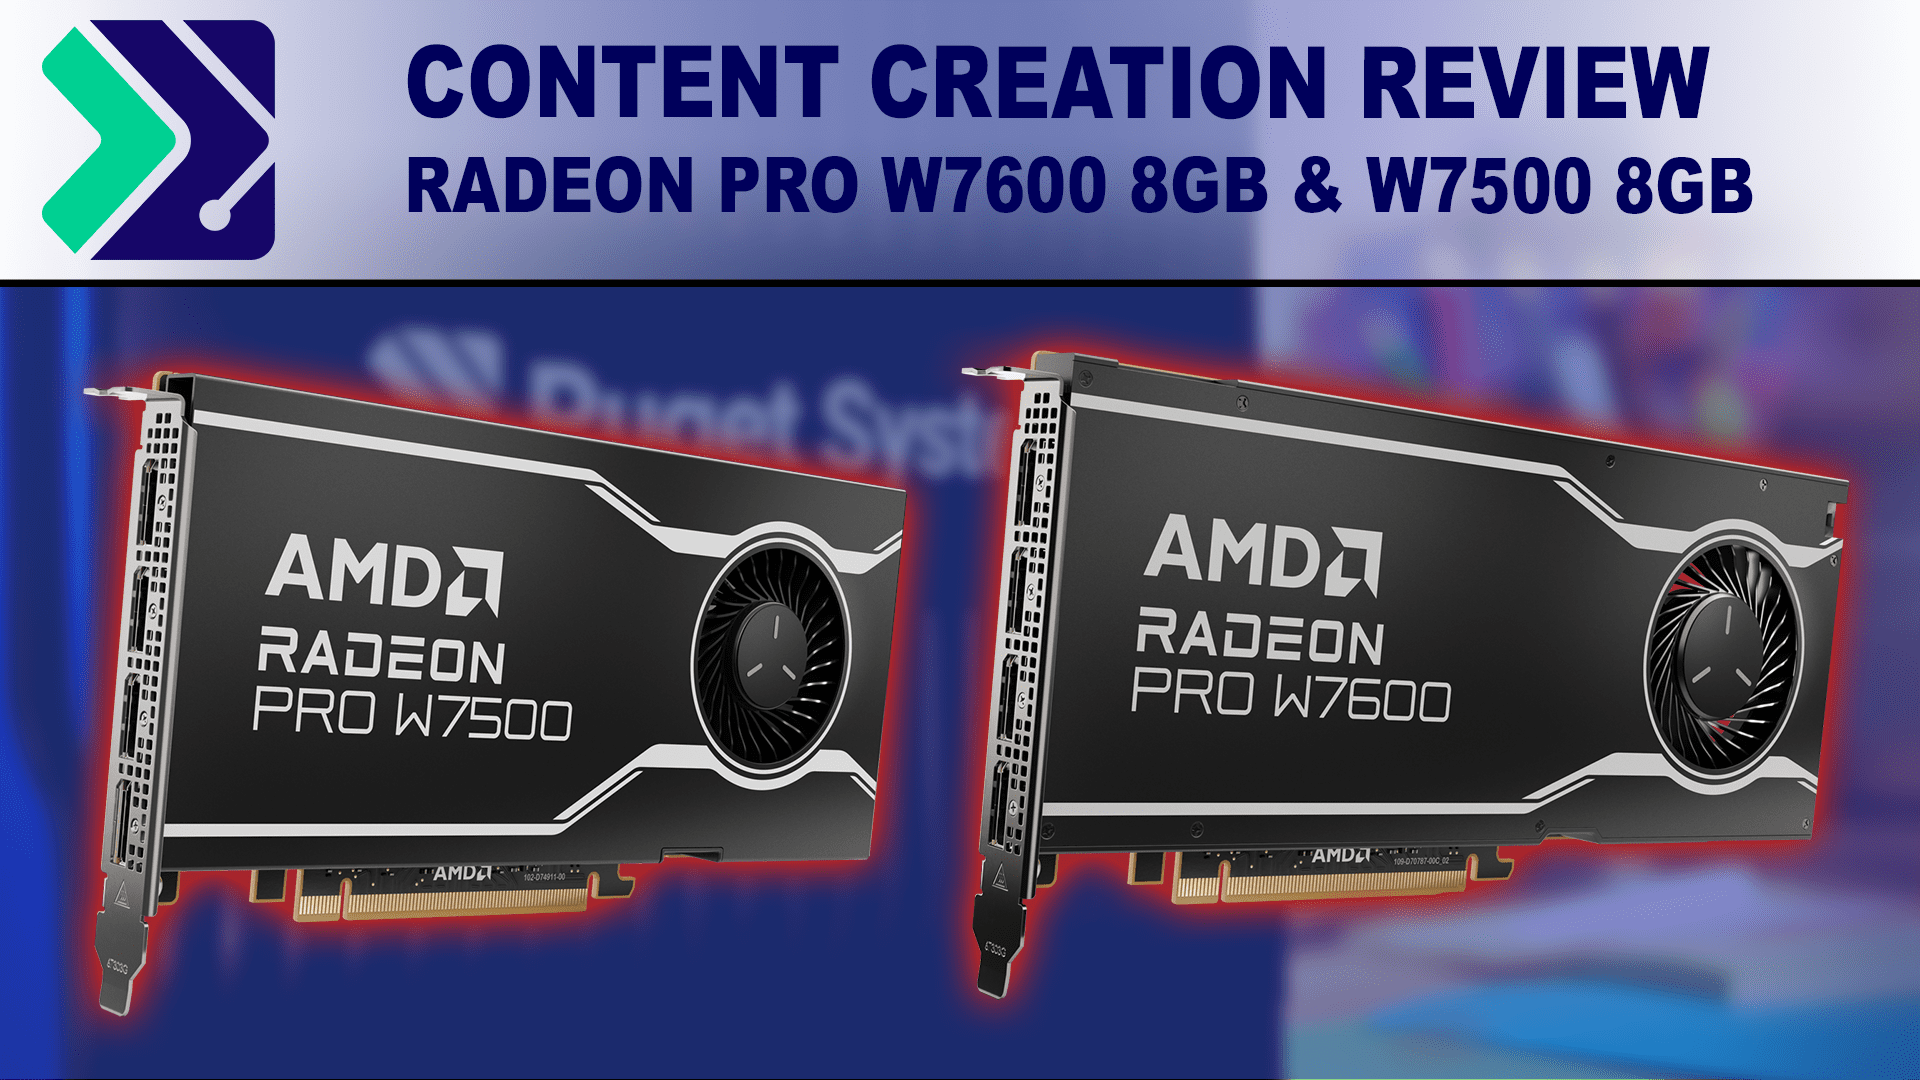 AMD Radeon PRO W7600 and W7500 Content Creation Review